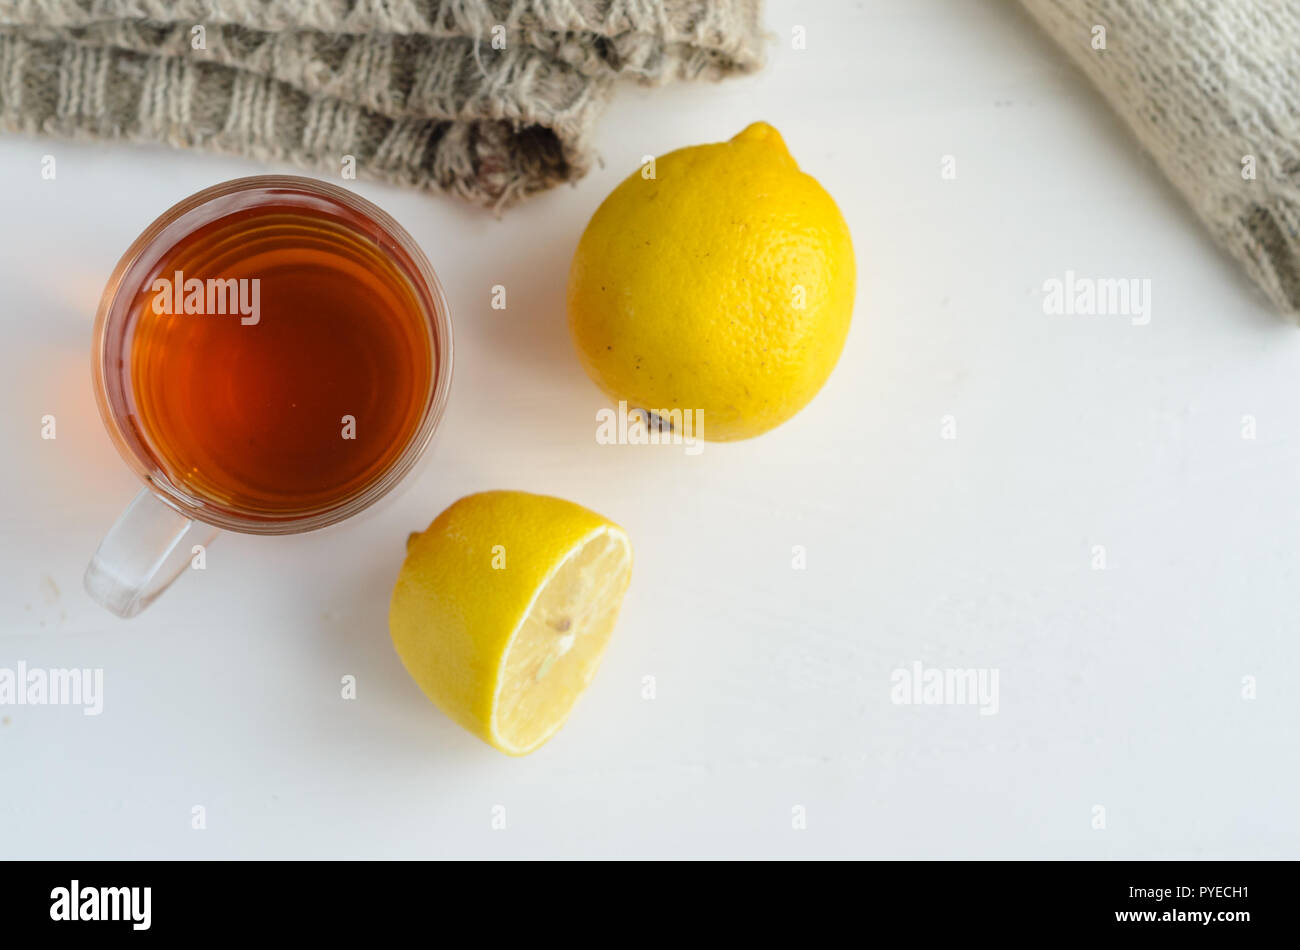 cup of tea , one and half lemon and woolen sweater. Stock Photo